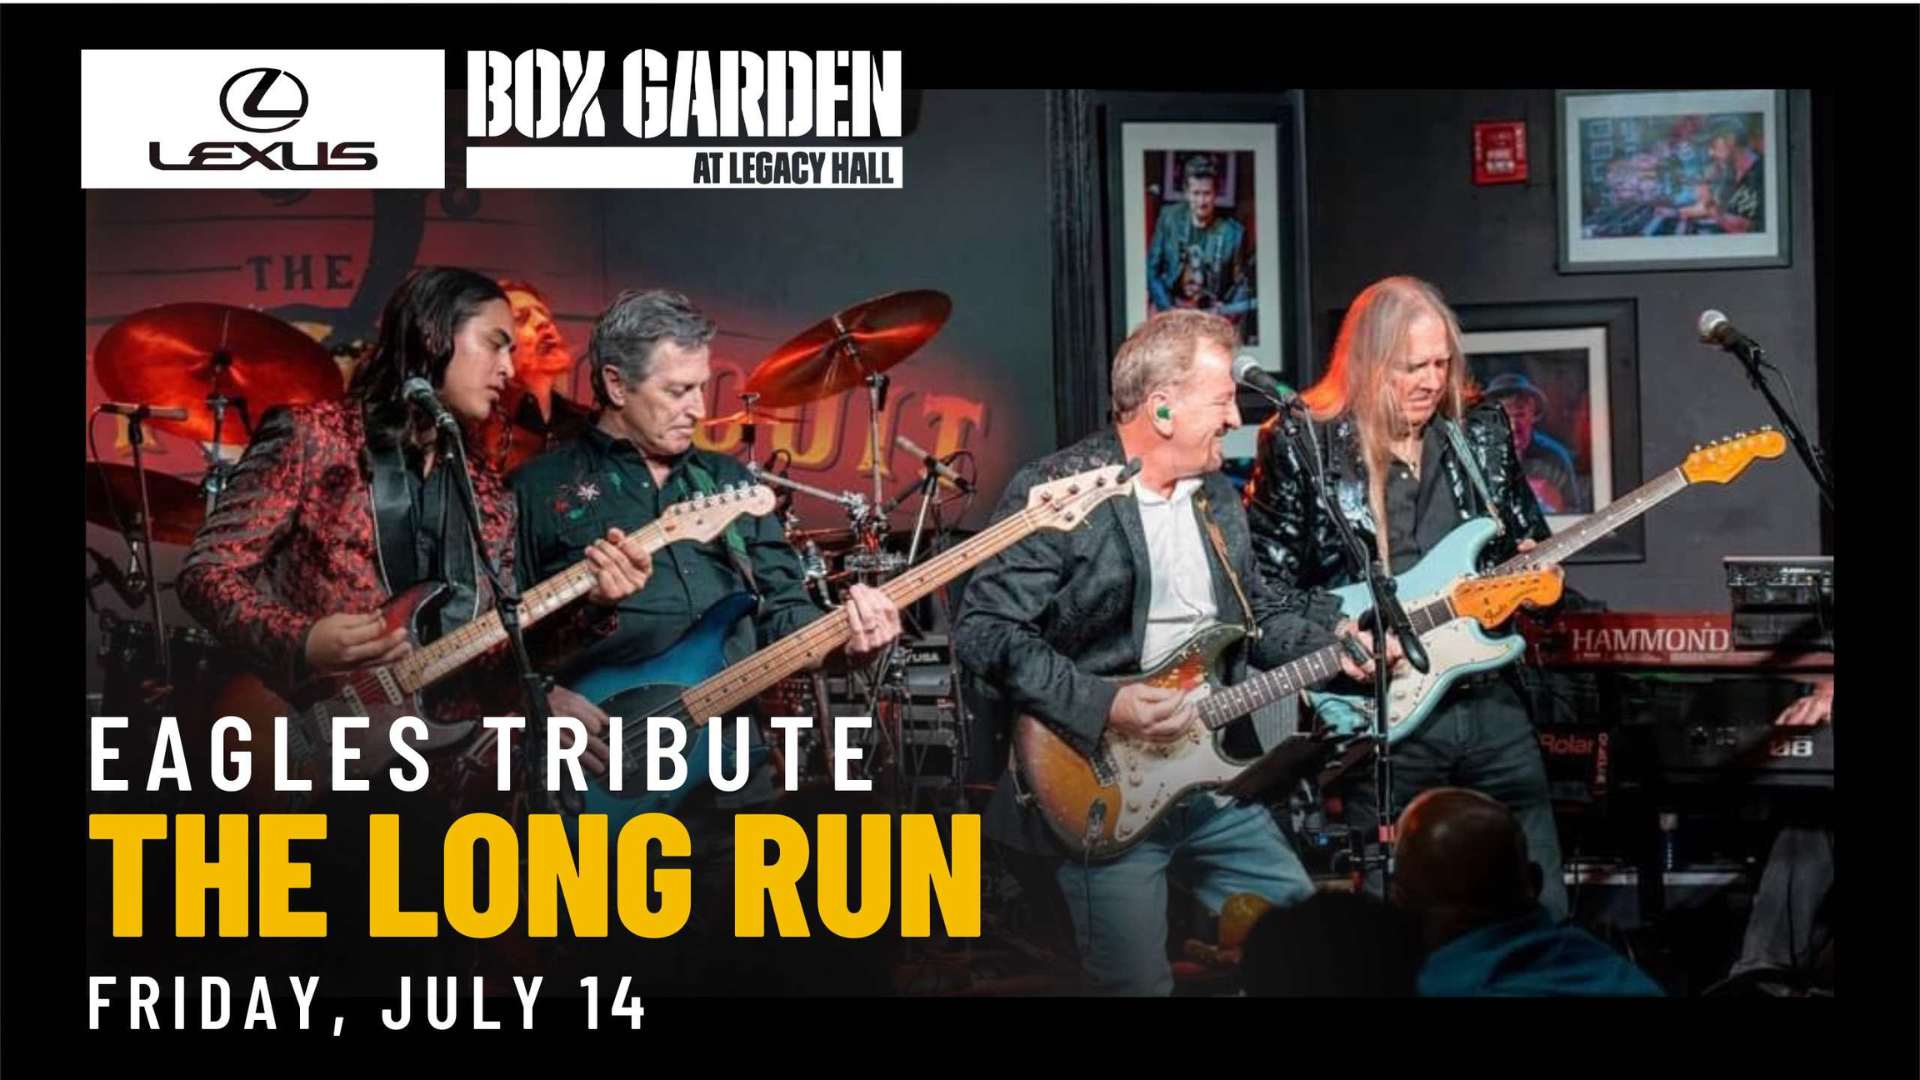 Promo image of Eagles Tribute: The Long Run